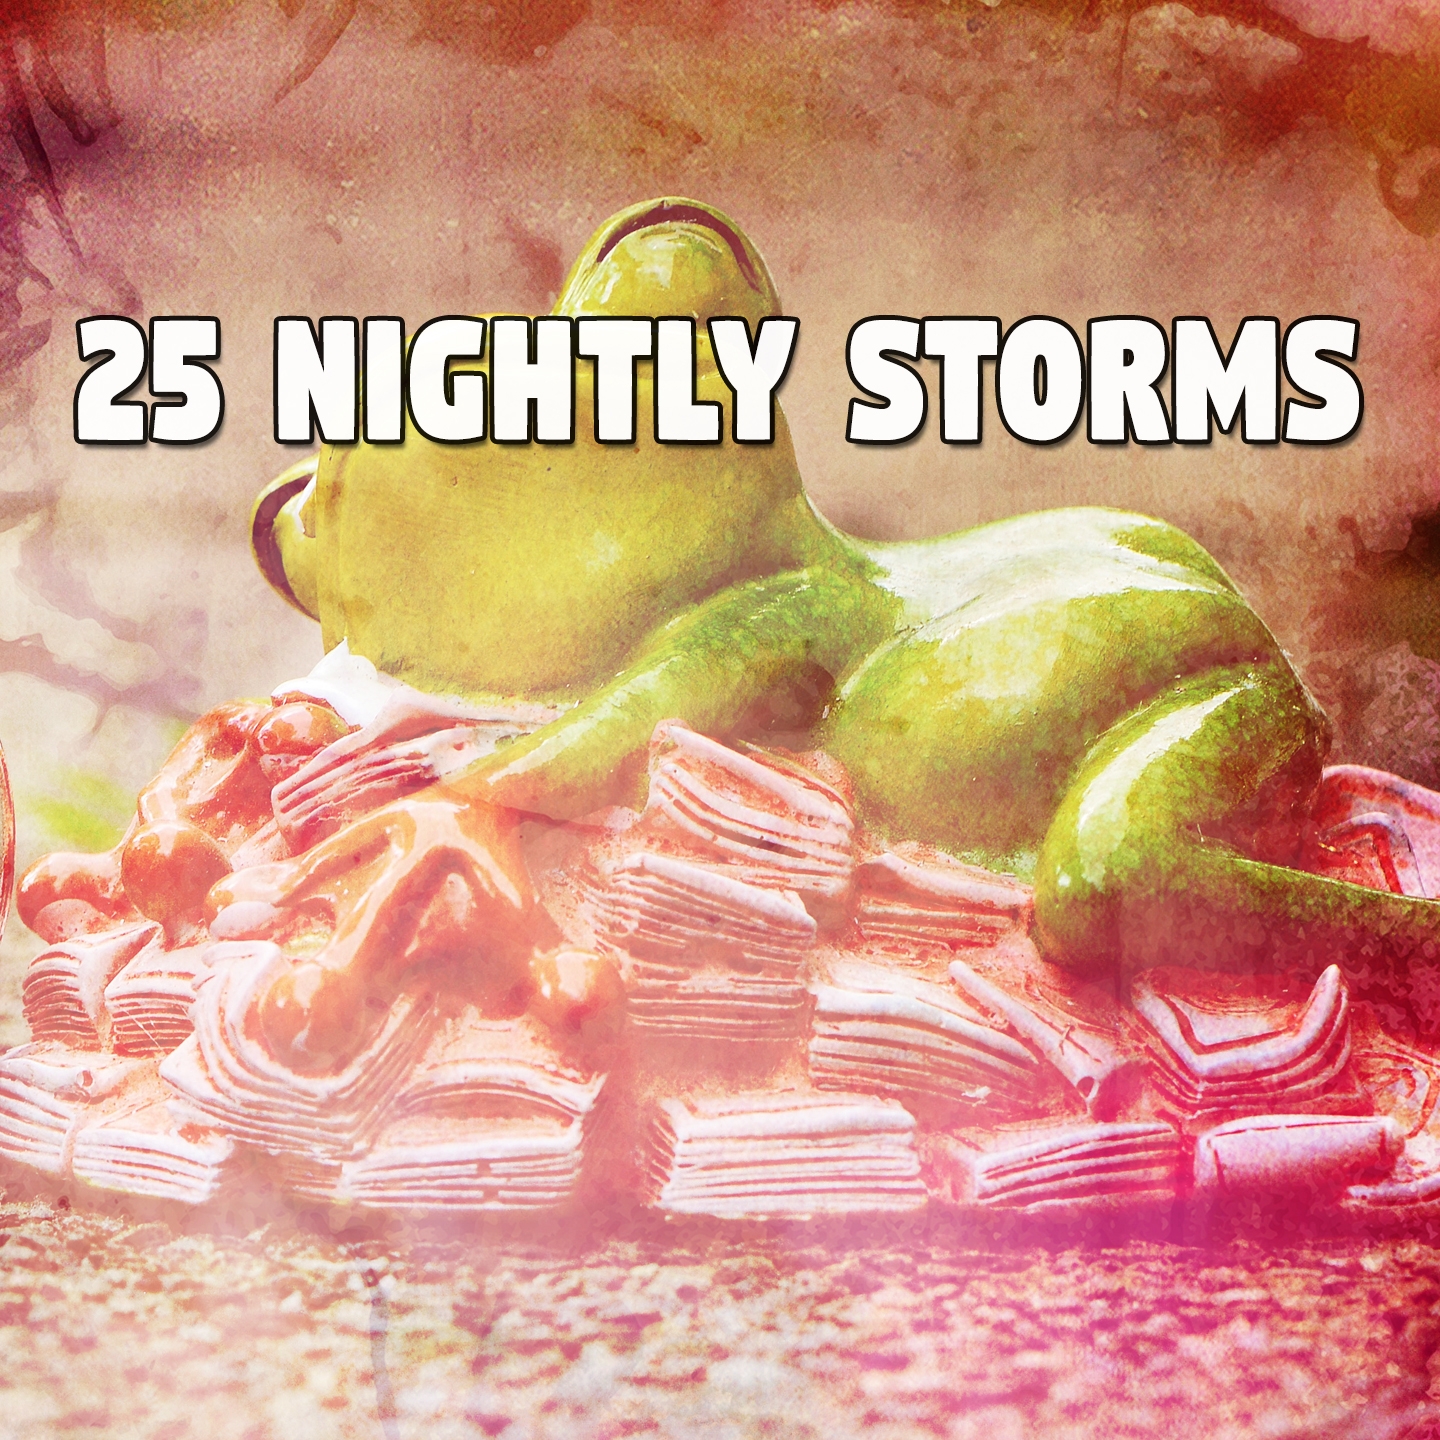 25 Nightly Storms